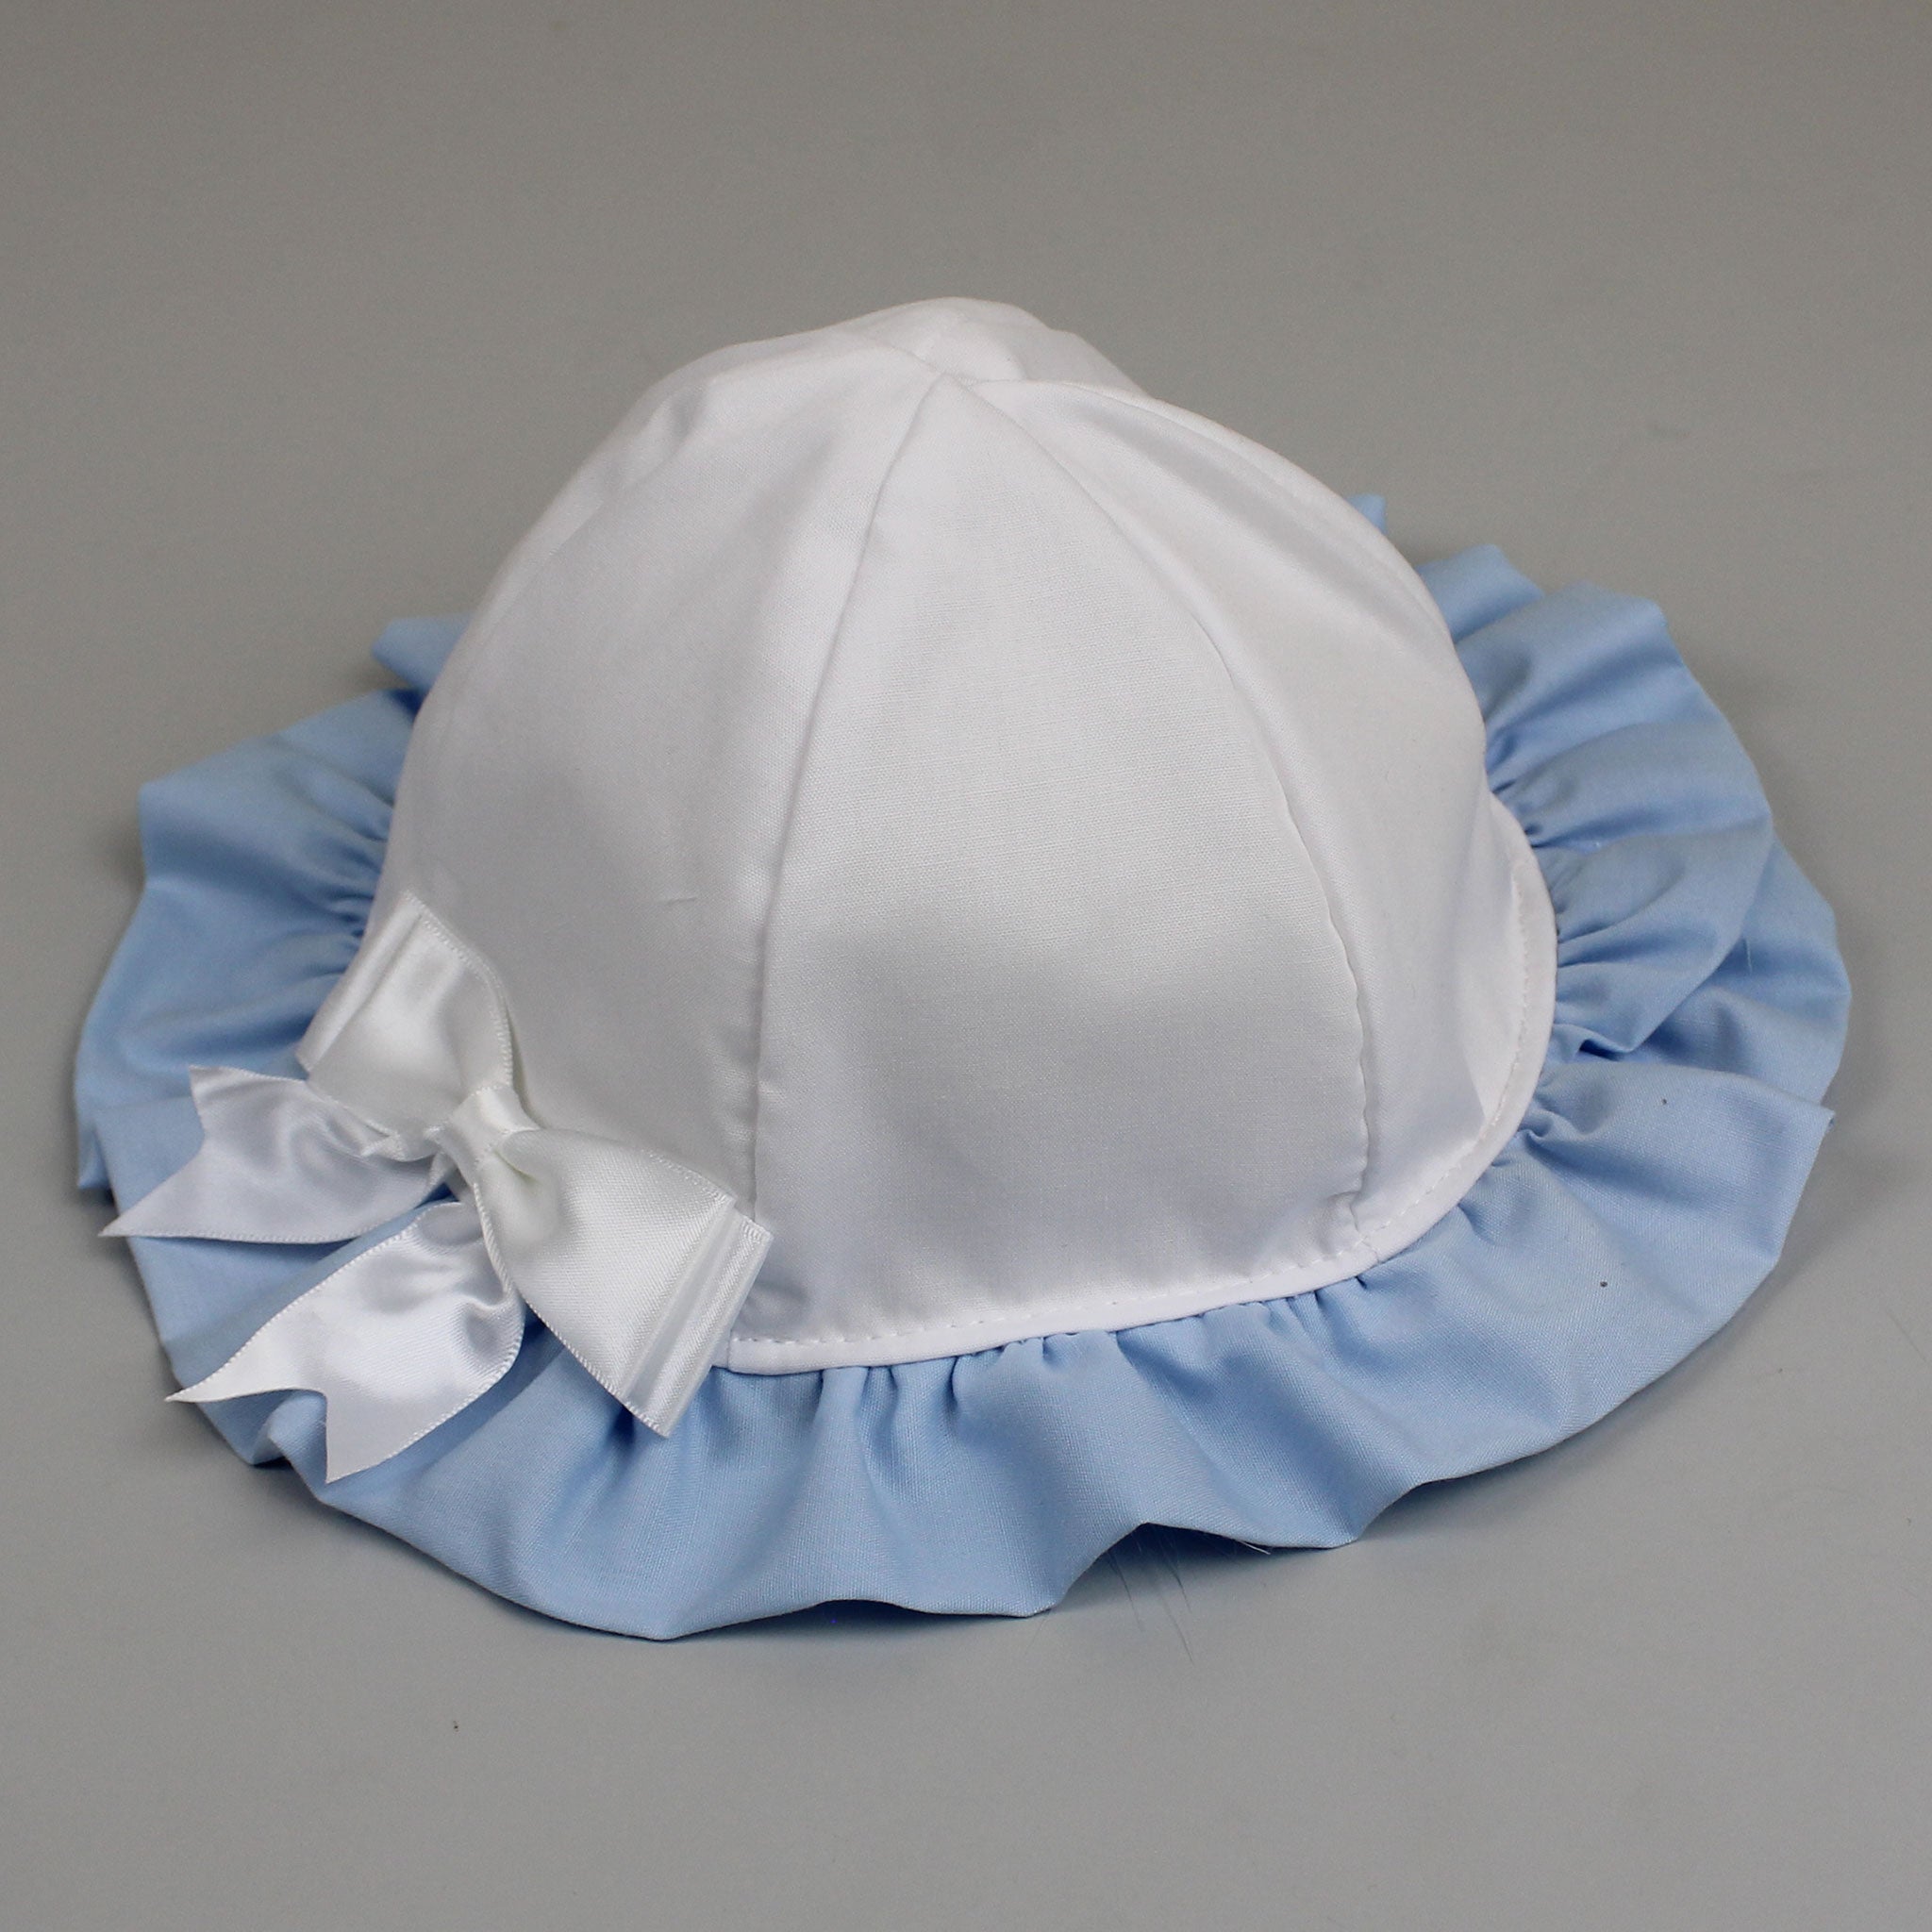 Baby girl summer hat - sunhat blue and white